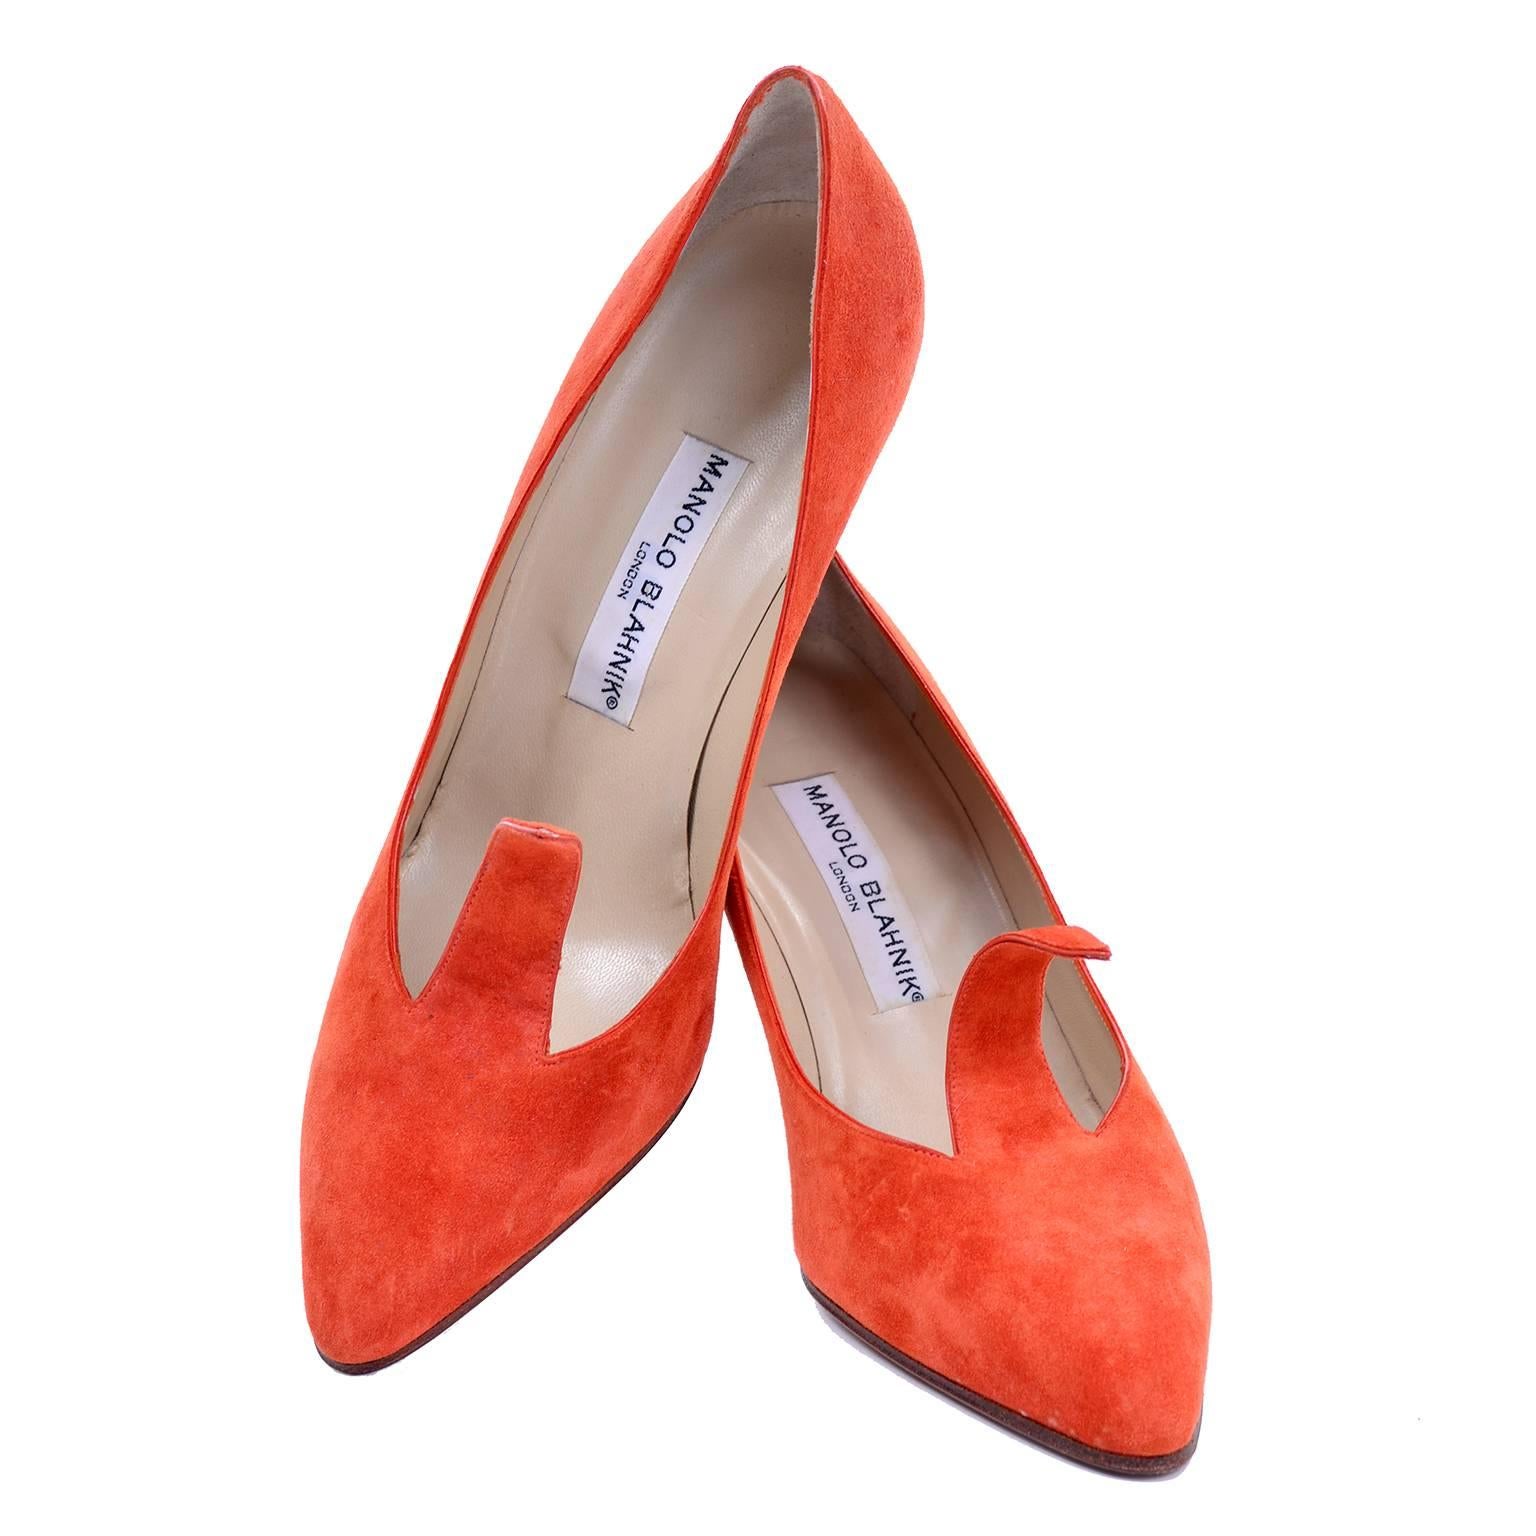 We adore these amazing orange suede vintage heels by Manolo Blahnik London, with a cutout pointed strip on the upper that is adjustable! You can form it to your foot, or curl it to your liking. These shoes have a rounded pointed toe. They have